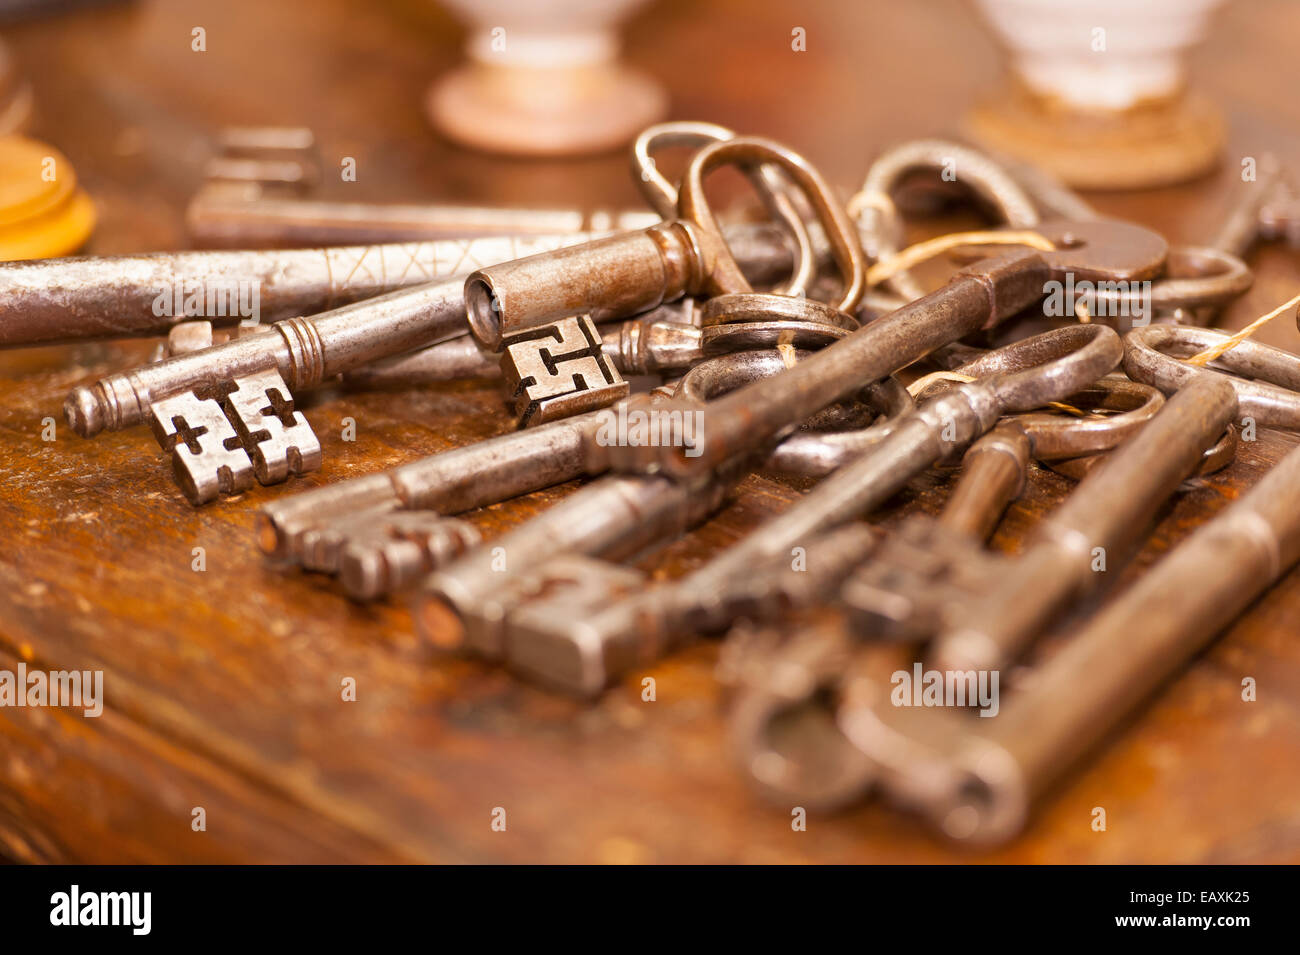 Madrid, Spain. 20th Nov, 2014. Detail of vintage keys, Feriarte art and antiques Fair, 38th edition from November 15th to 23th 2014, Ifema fair center, Madrid, Spain. Credit:  Emanuele Ciccomartino/Alamy Live News Stock Photo